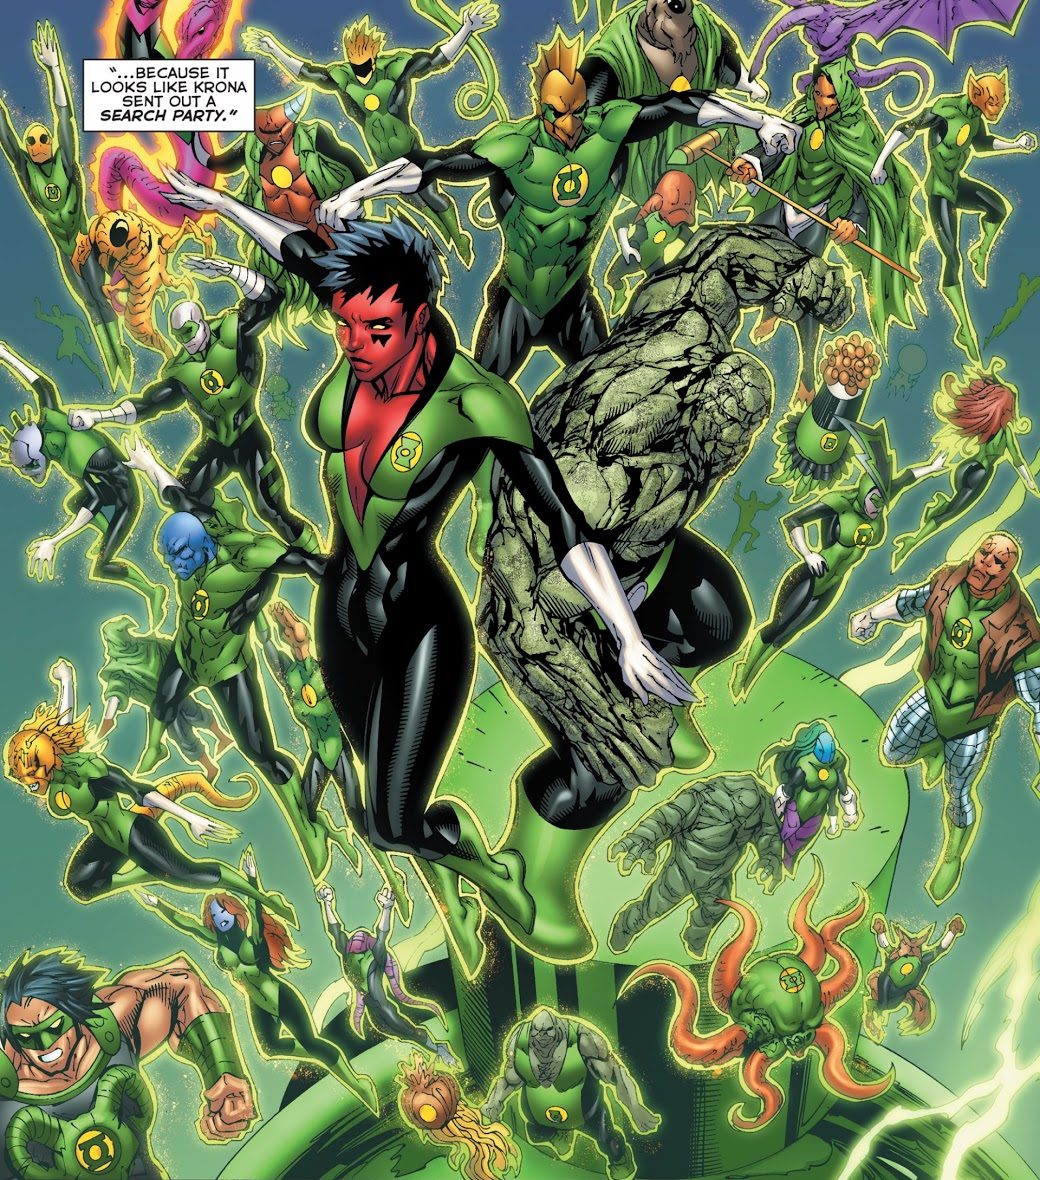 From - Green Lantern Corps Vol. 2 #58